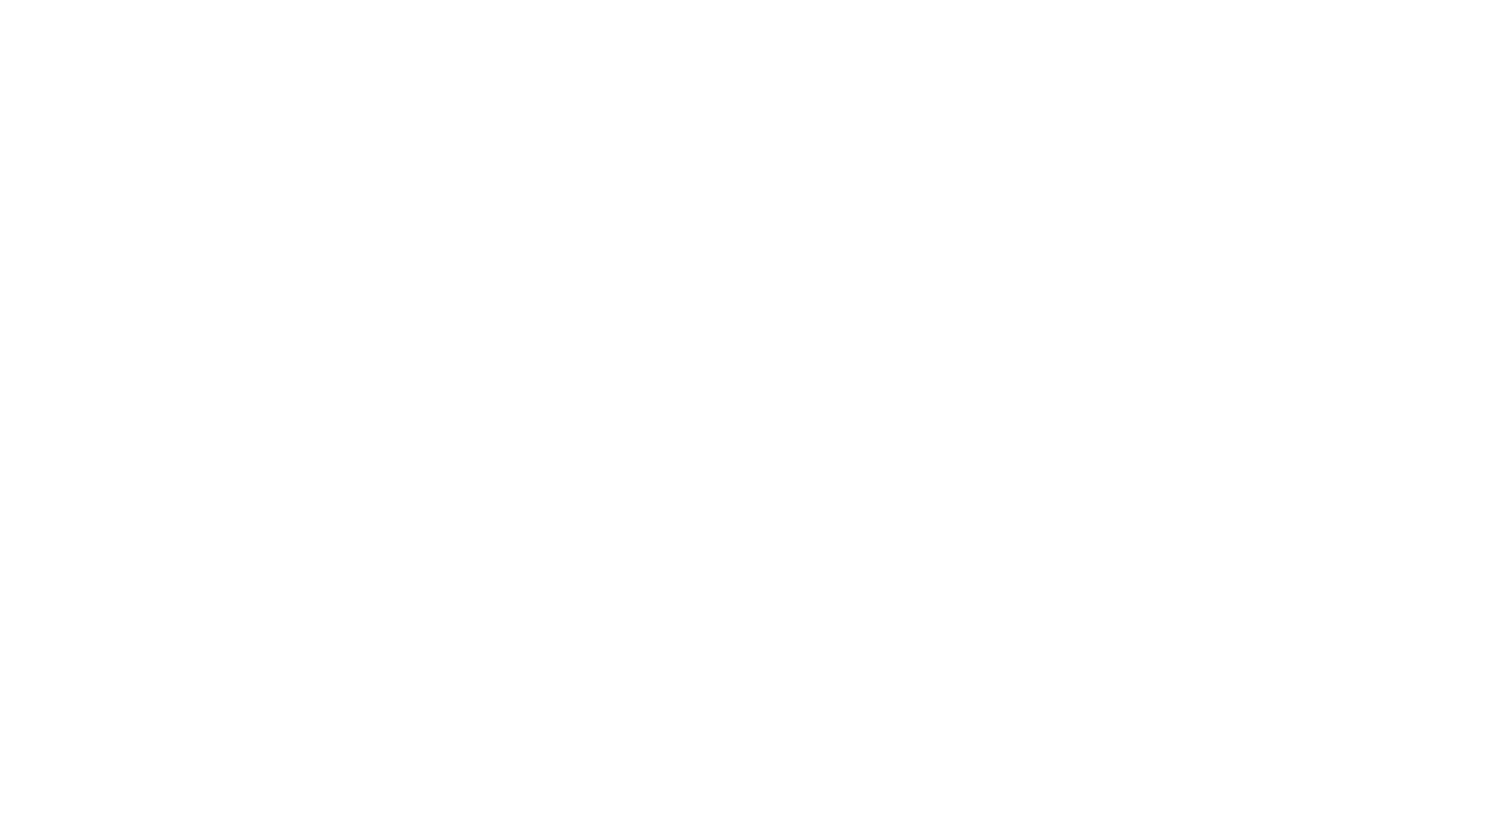 The DGBM Taylor Family Foundation